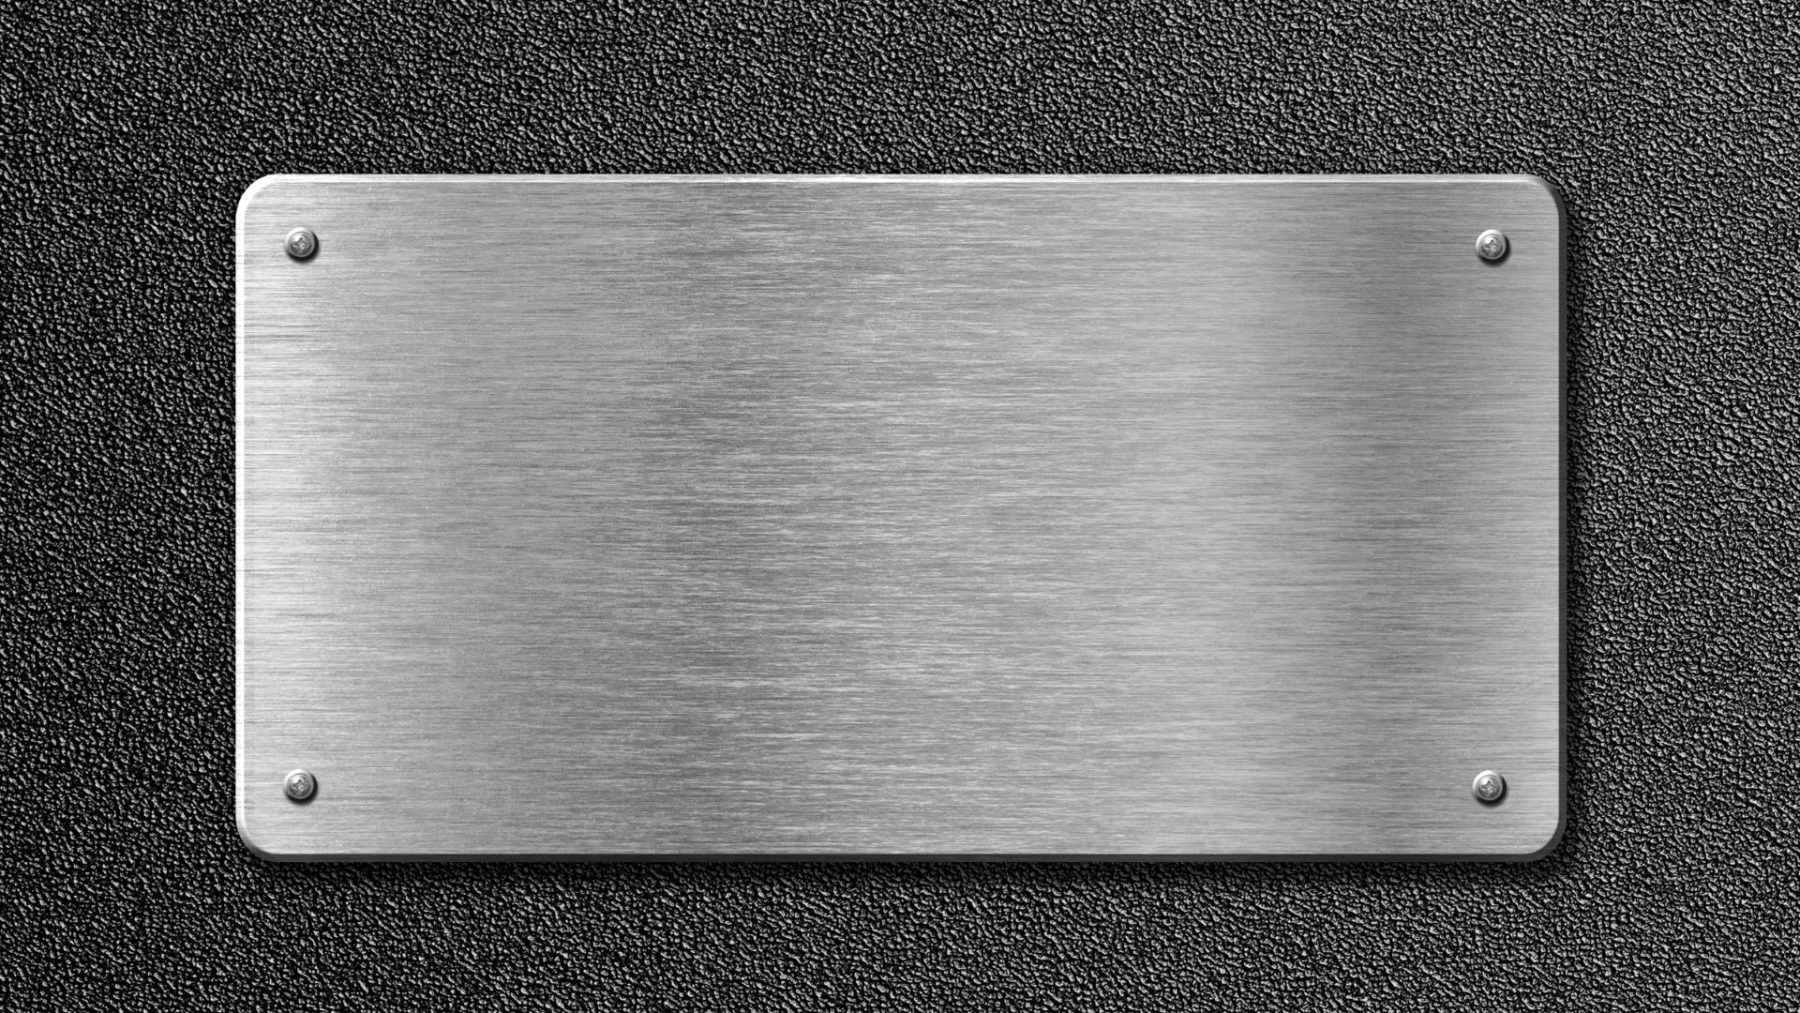 Superior stainless steel